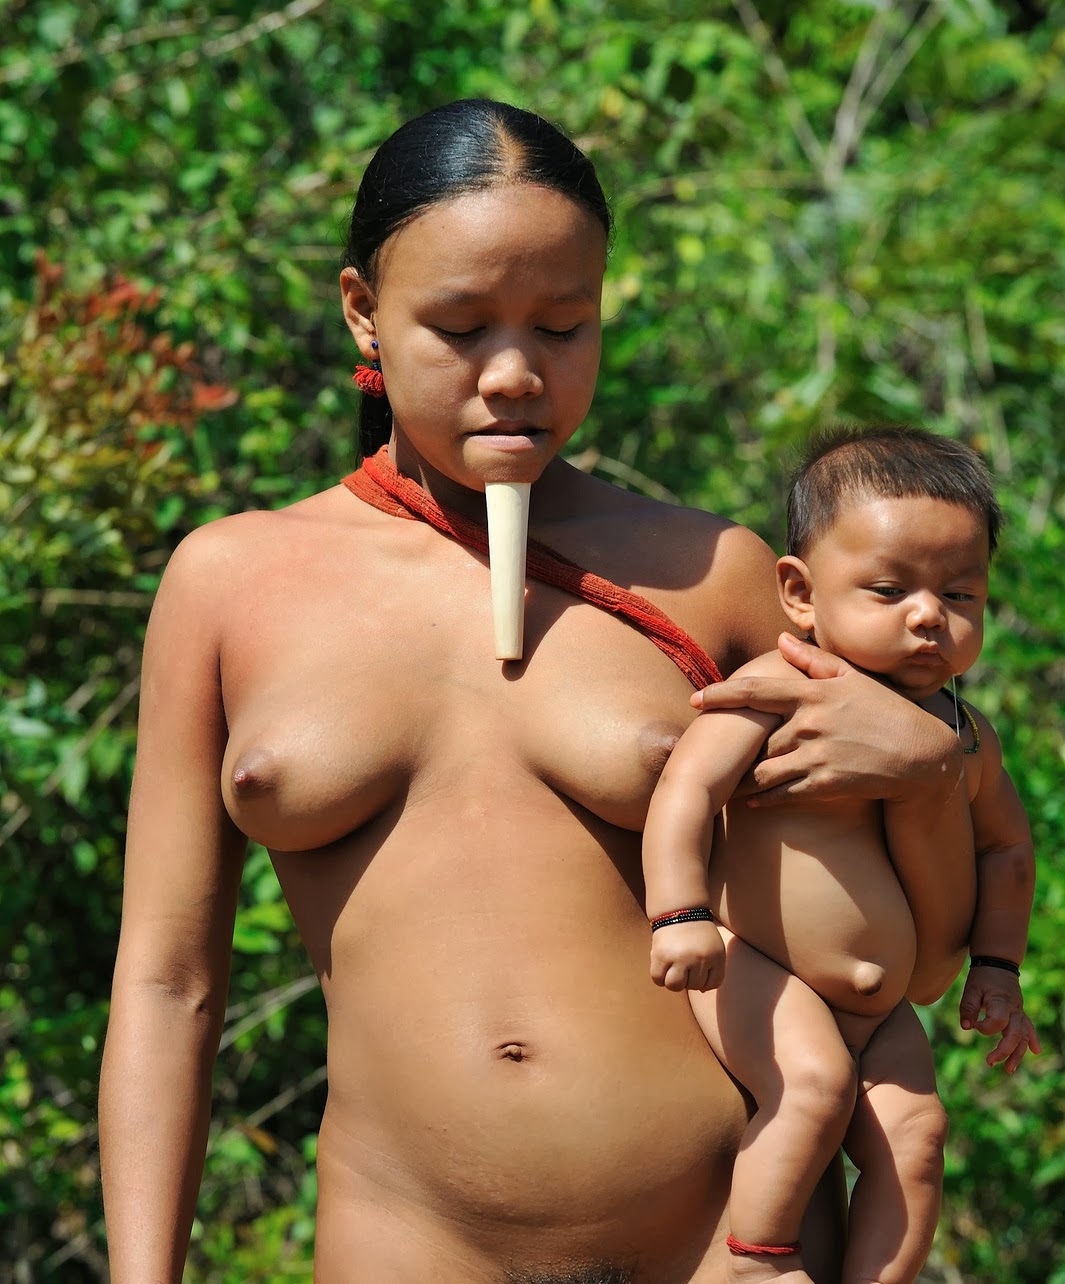 Images of naked amazonian women porn clips